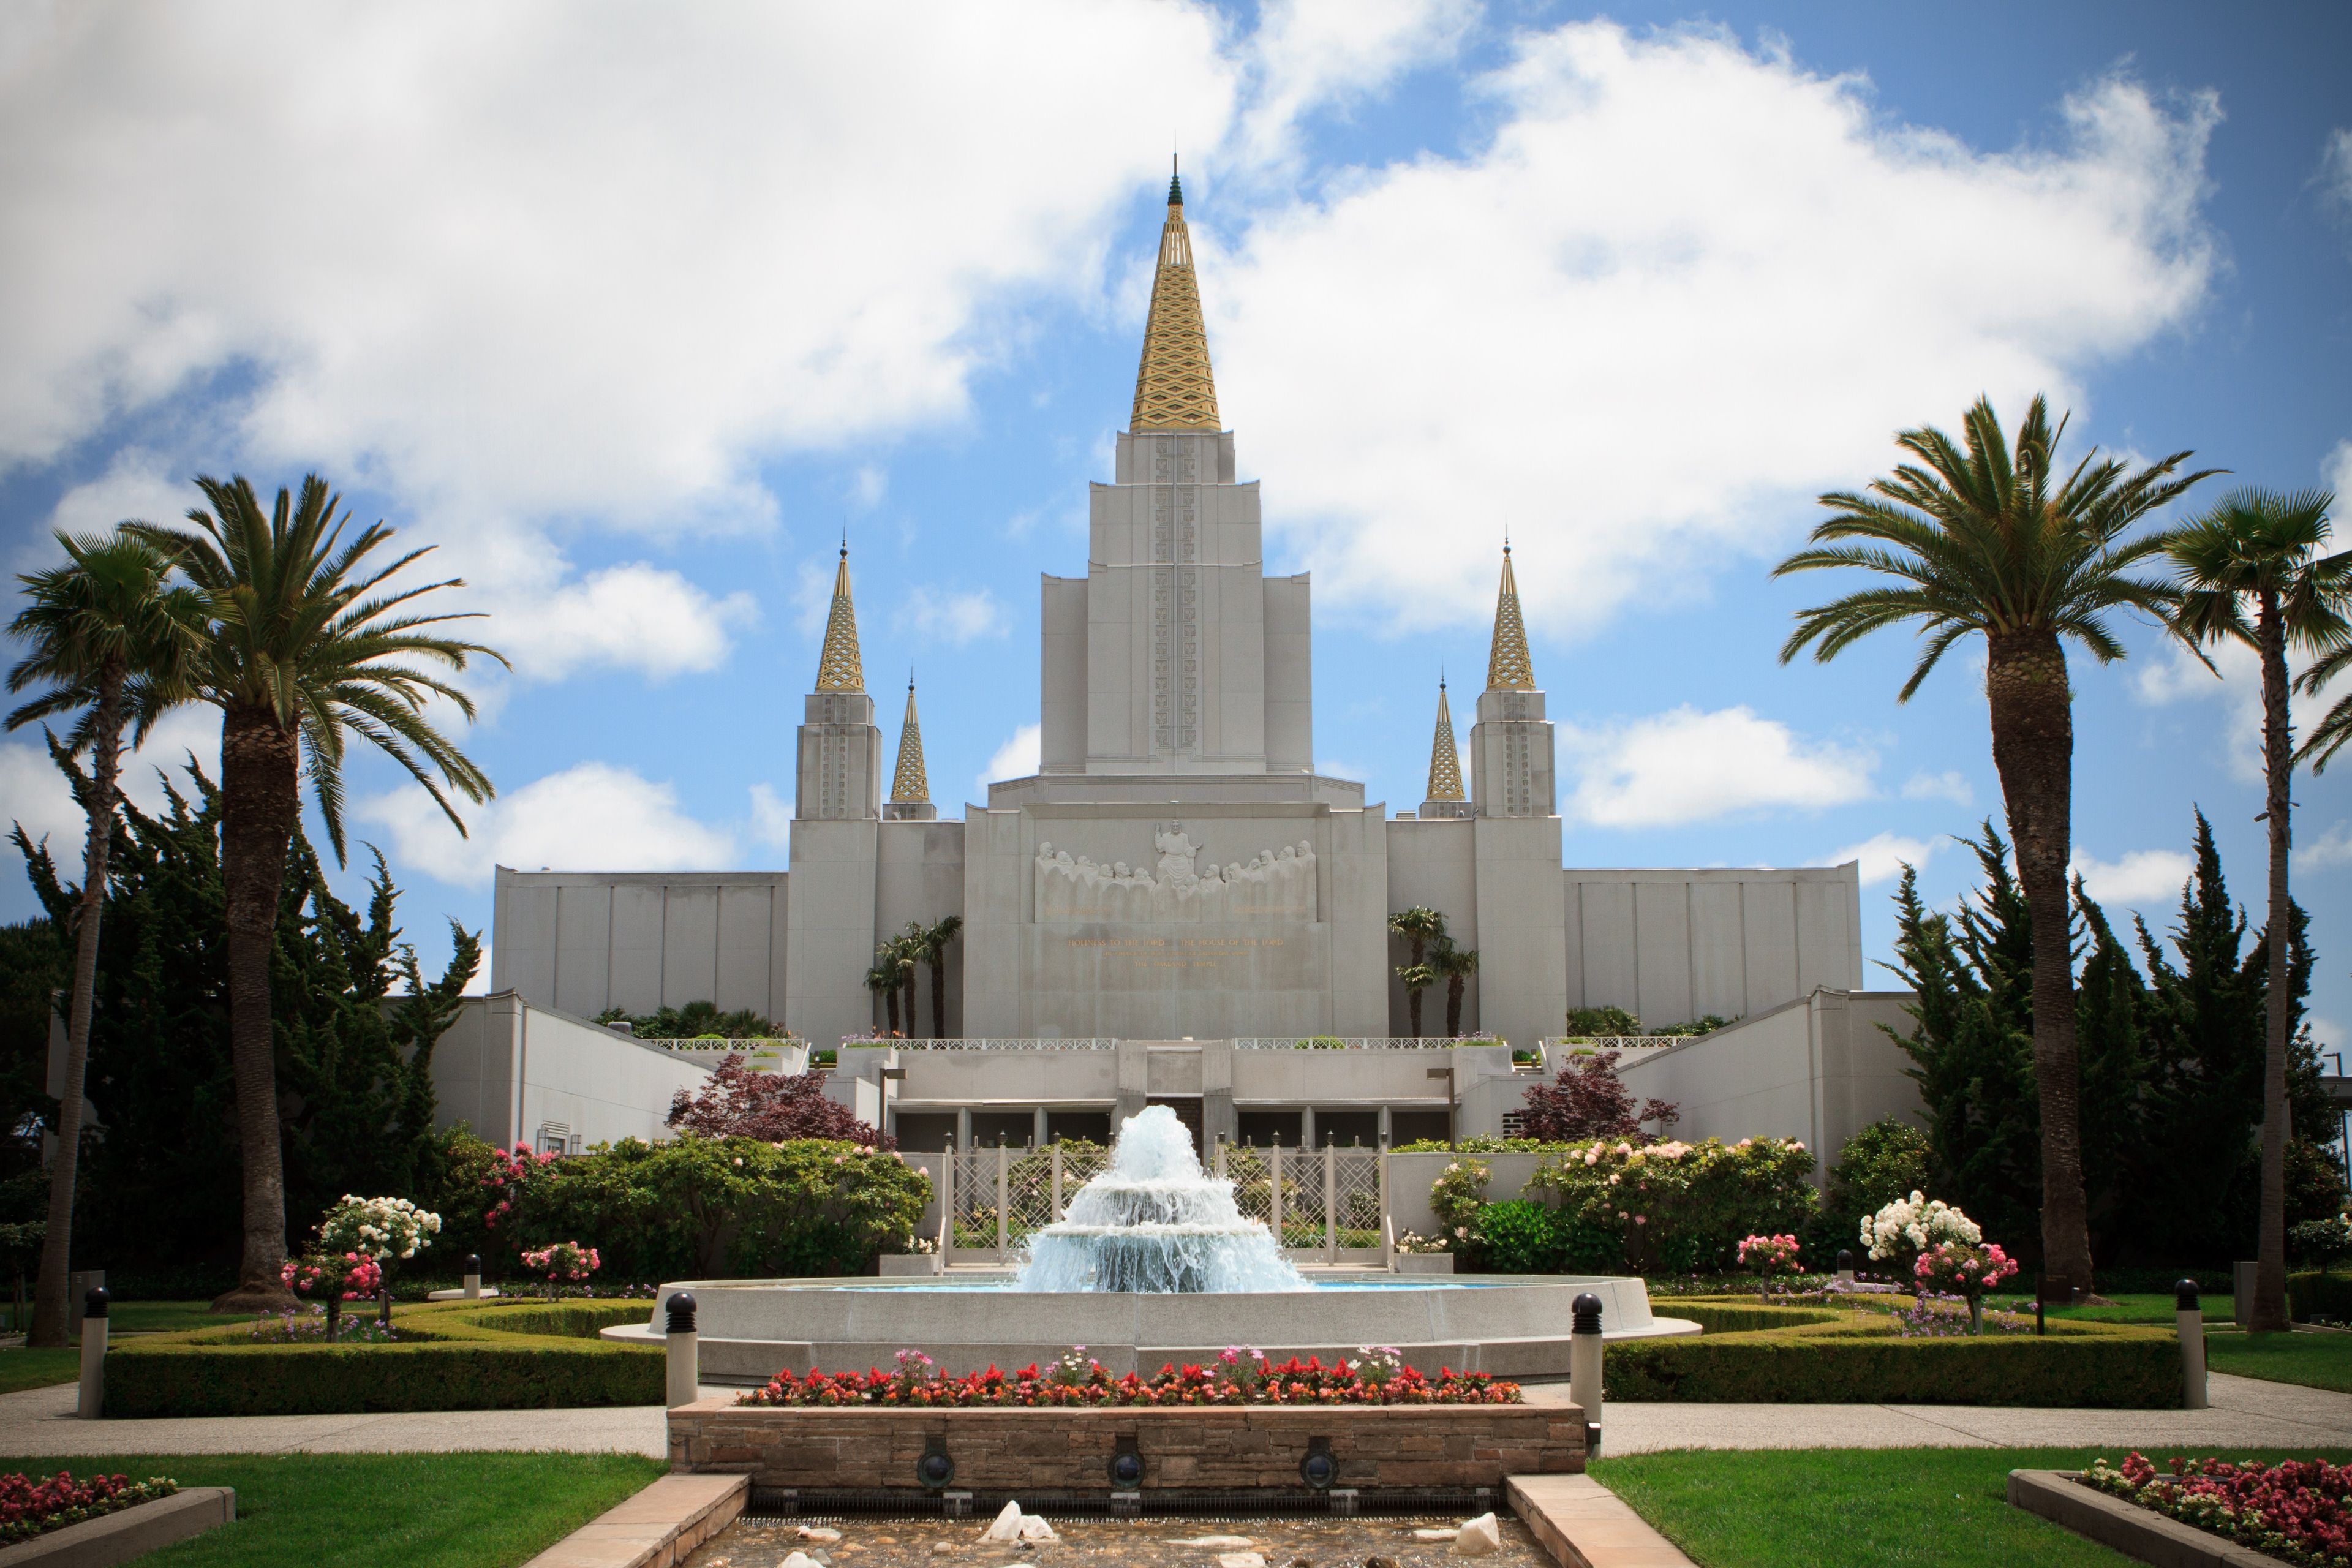 The entire Oakland California Temple, including the fountain, entrance, and scenery.